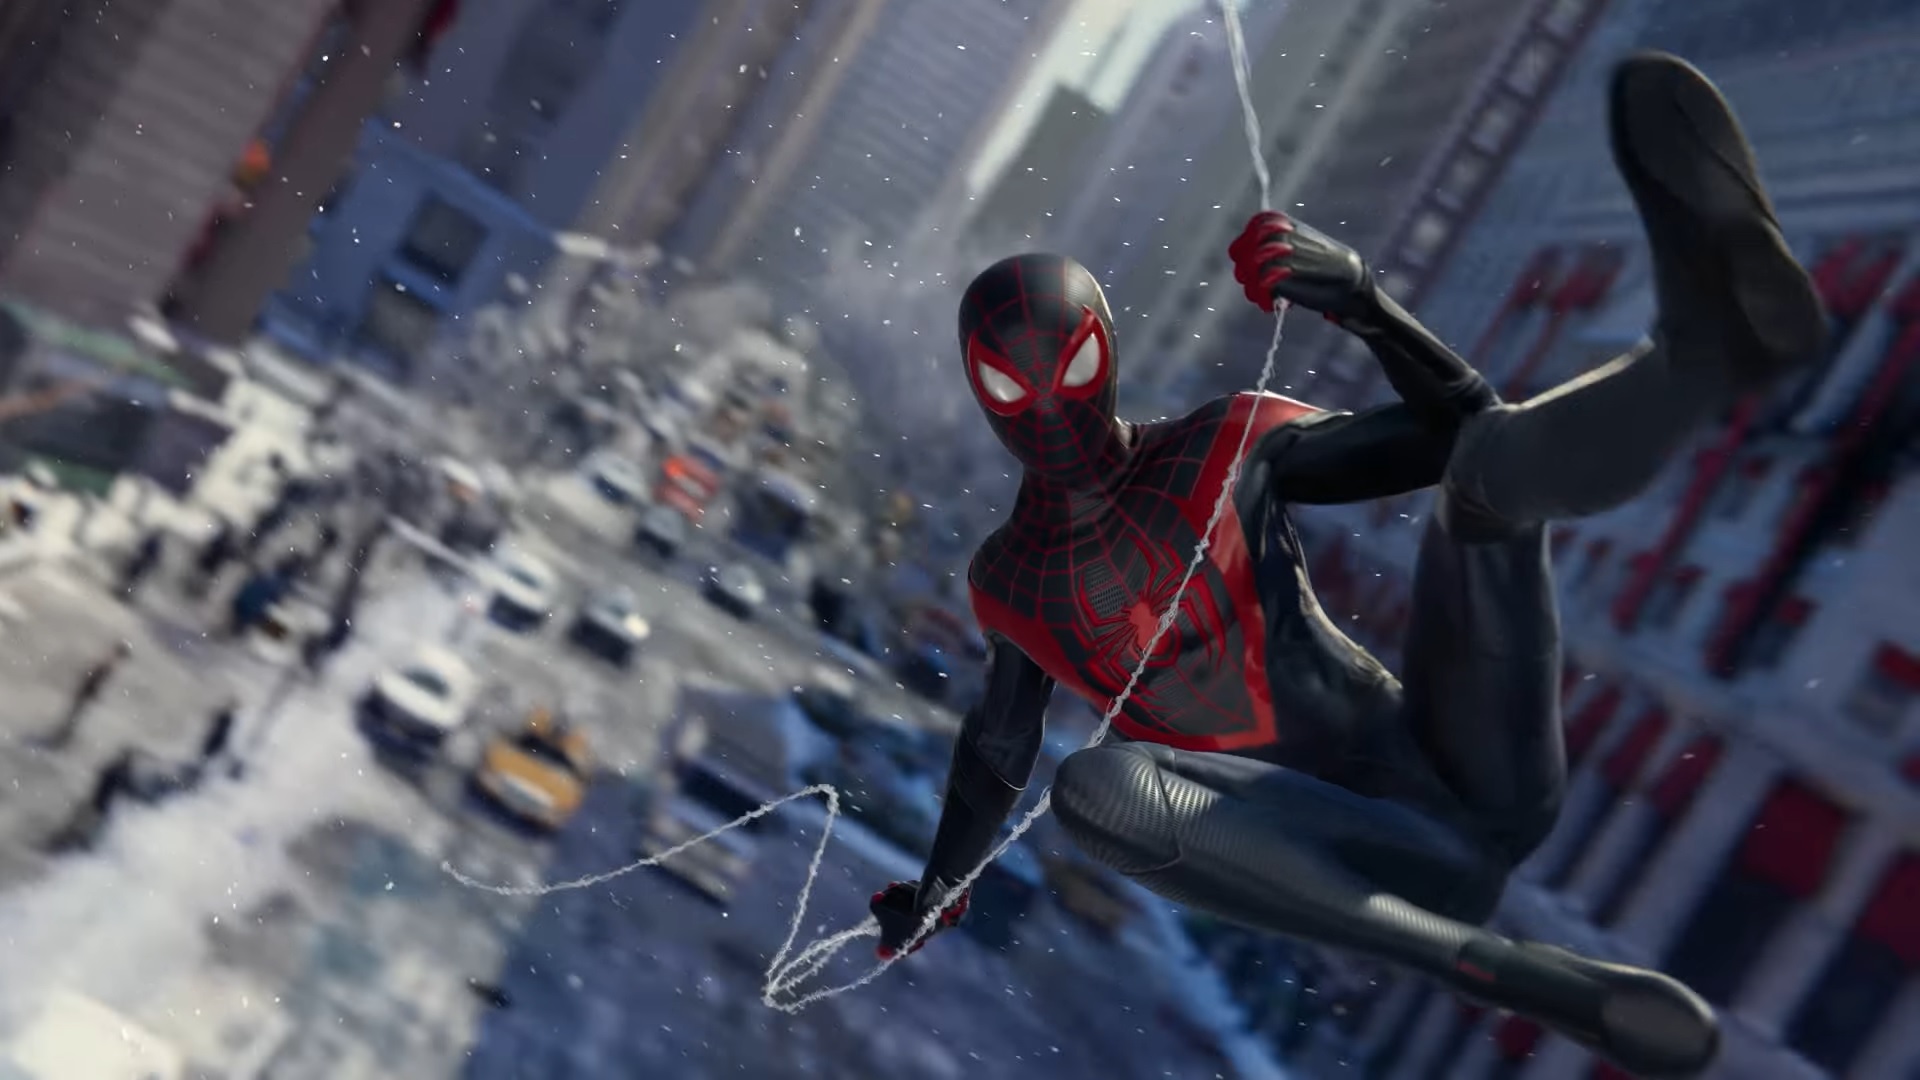 Marvel's Spider-Man: Miles Morales PC is another stellar Sony port